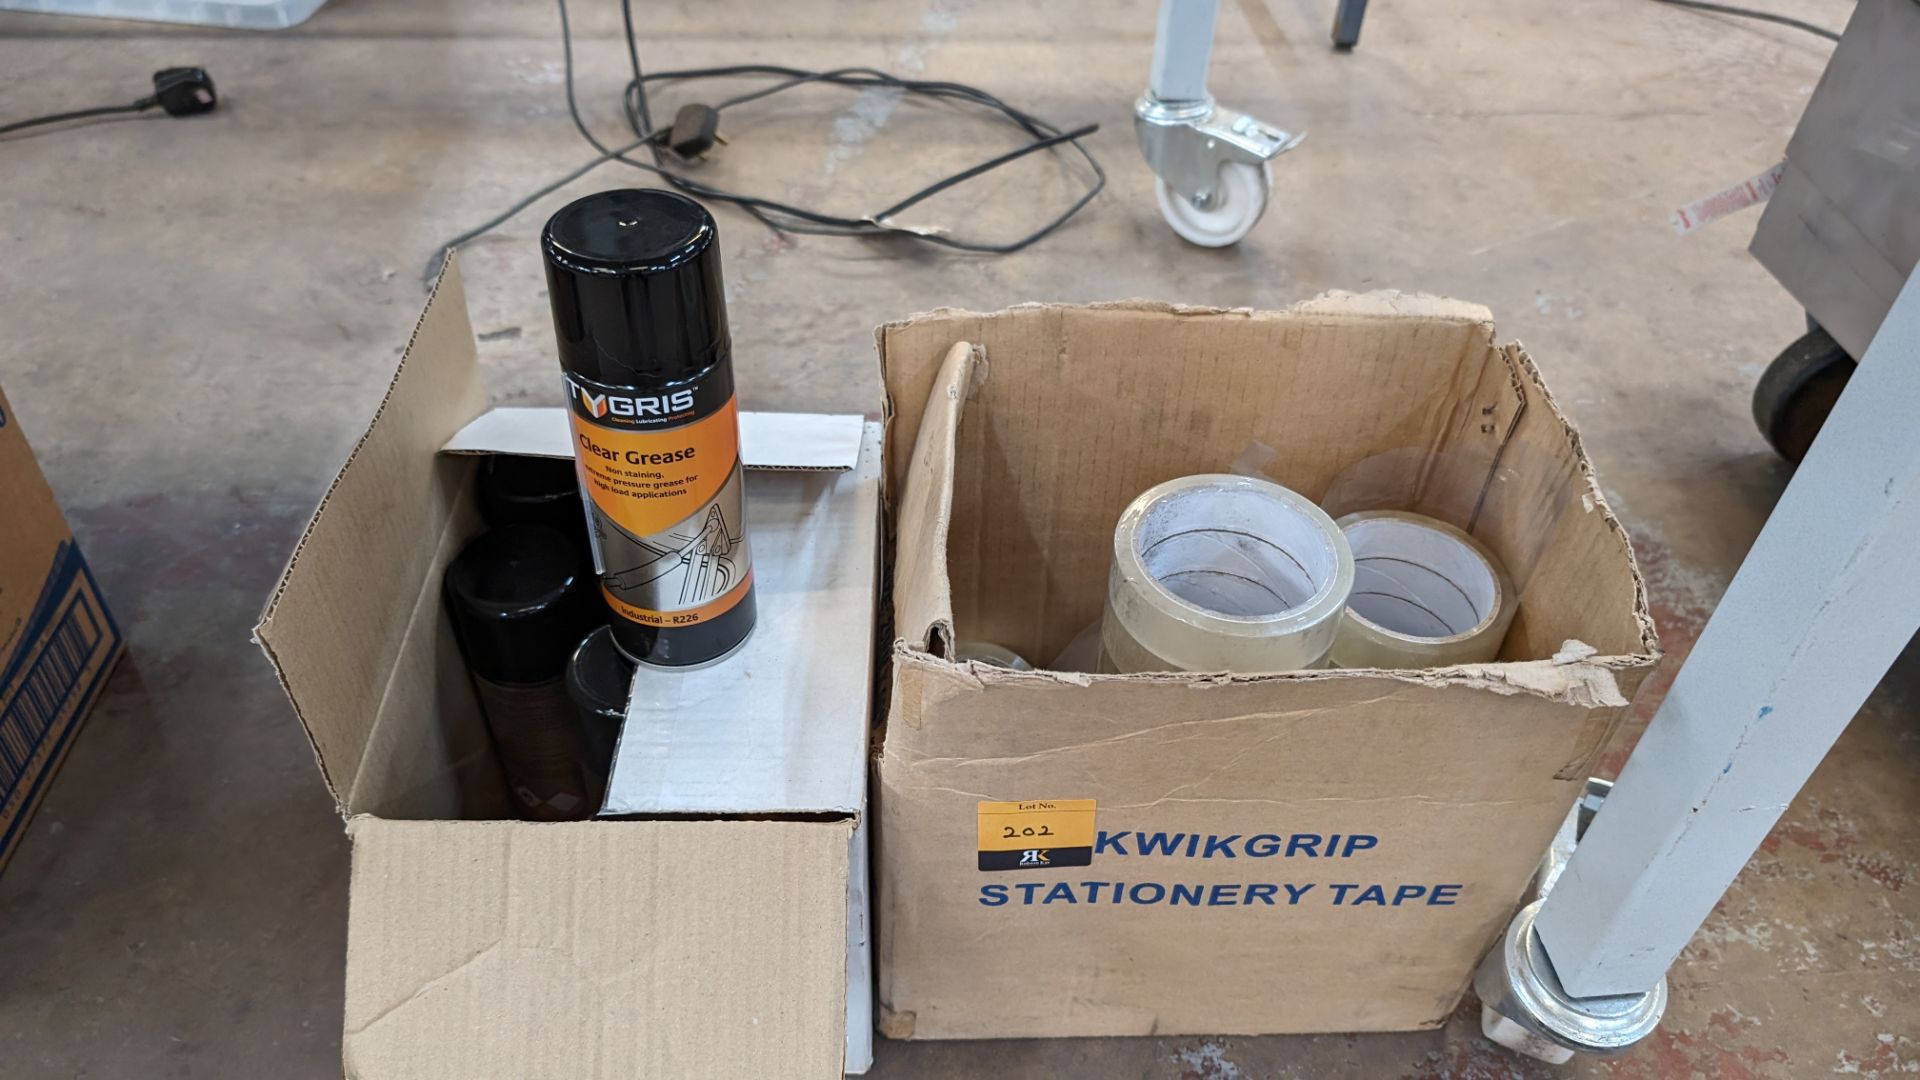 Box of tape plus box of grease spray - Image 2 of 6